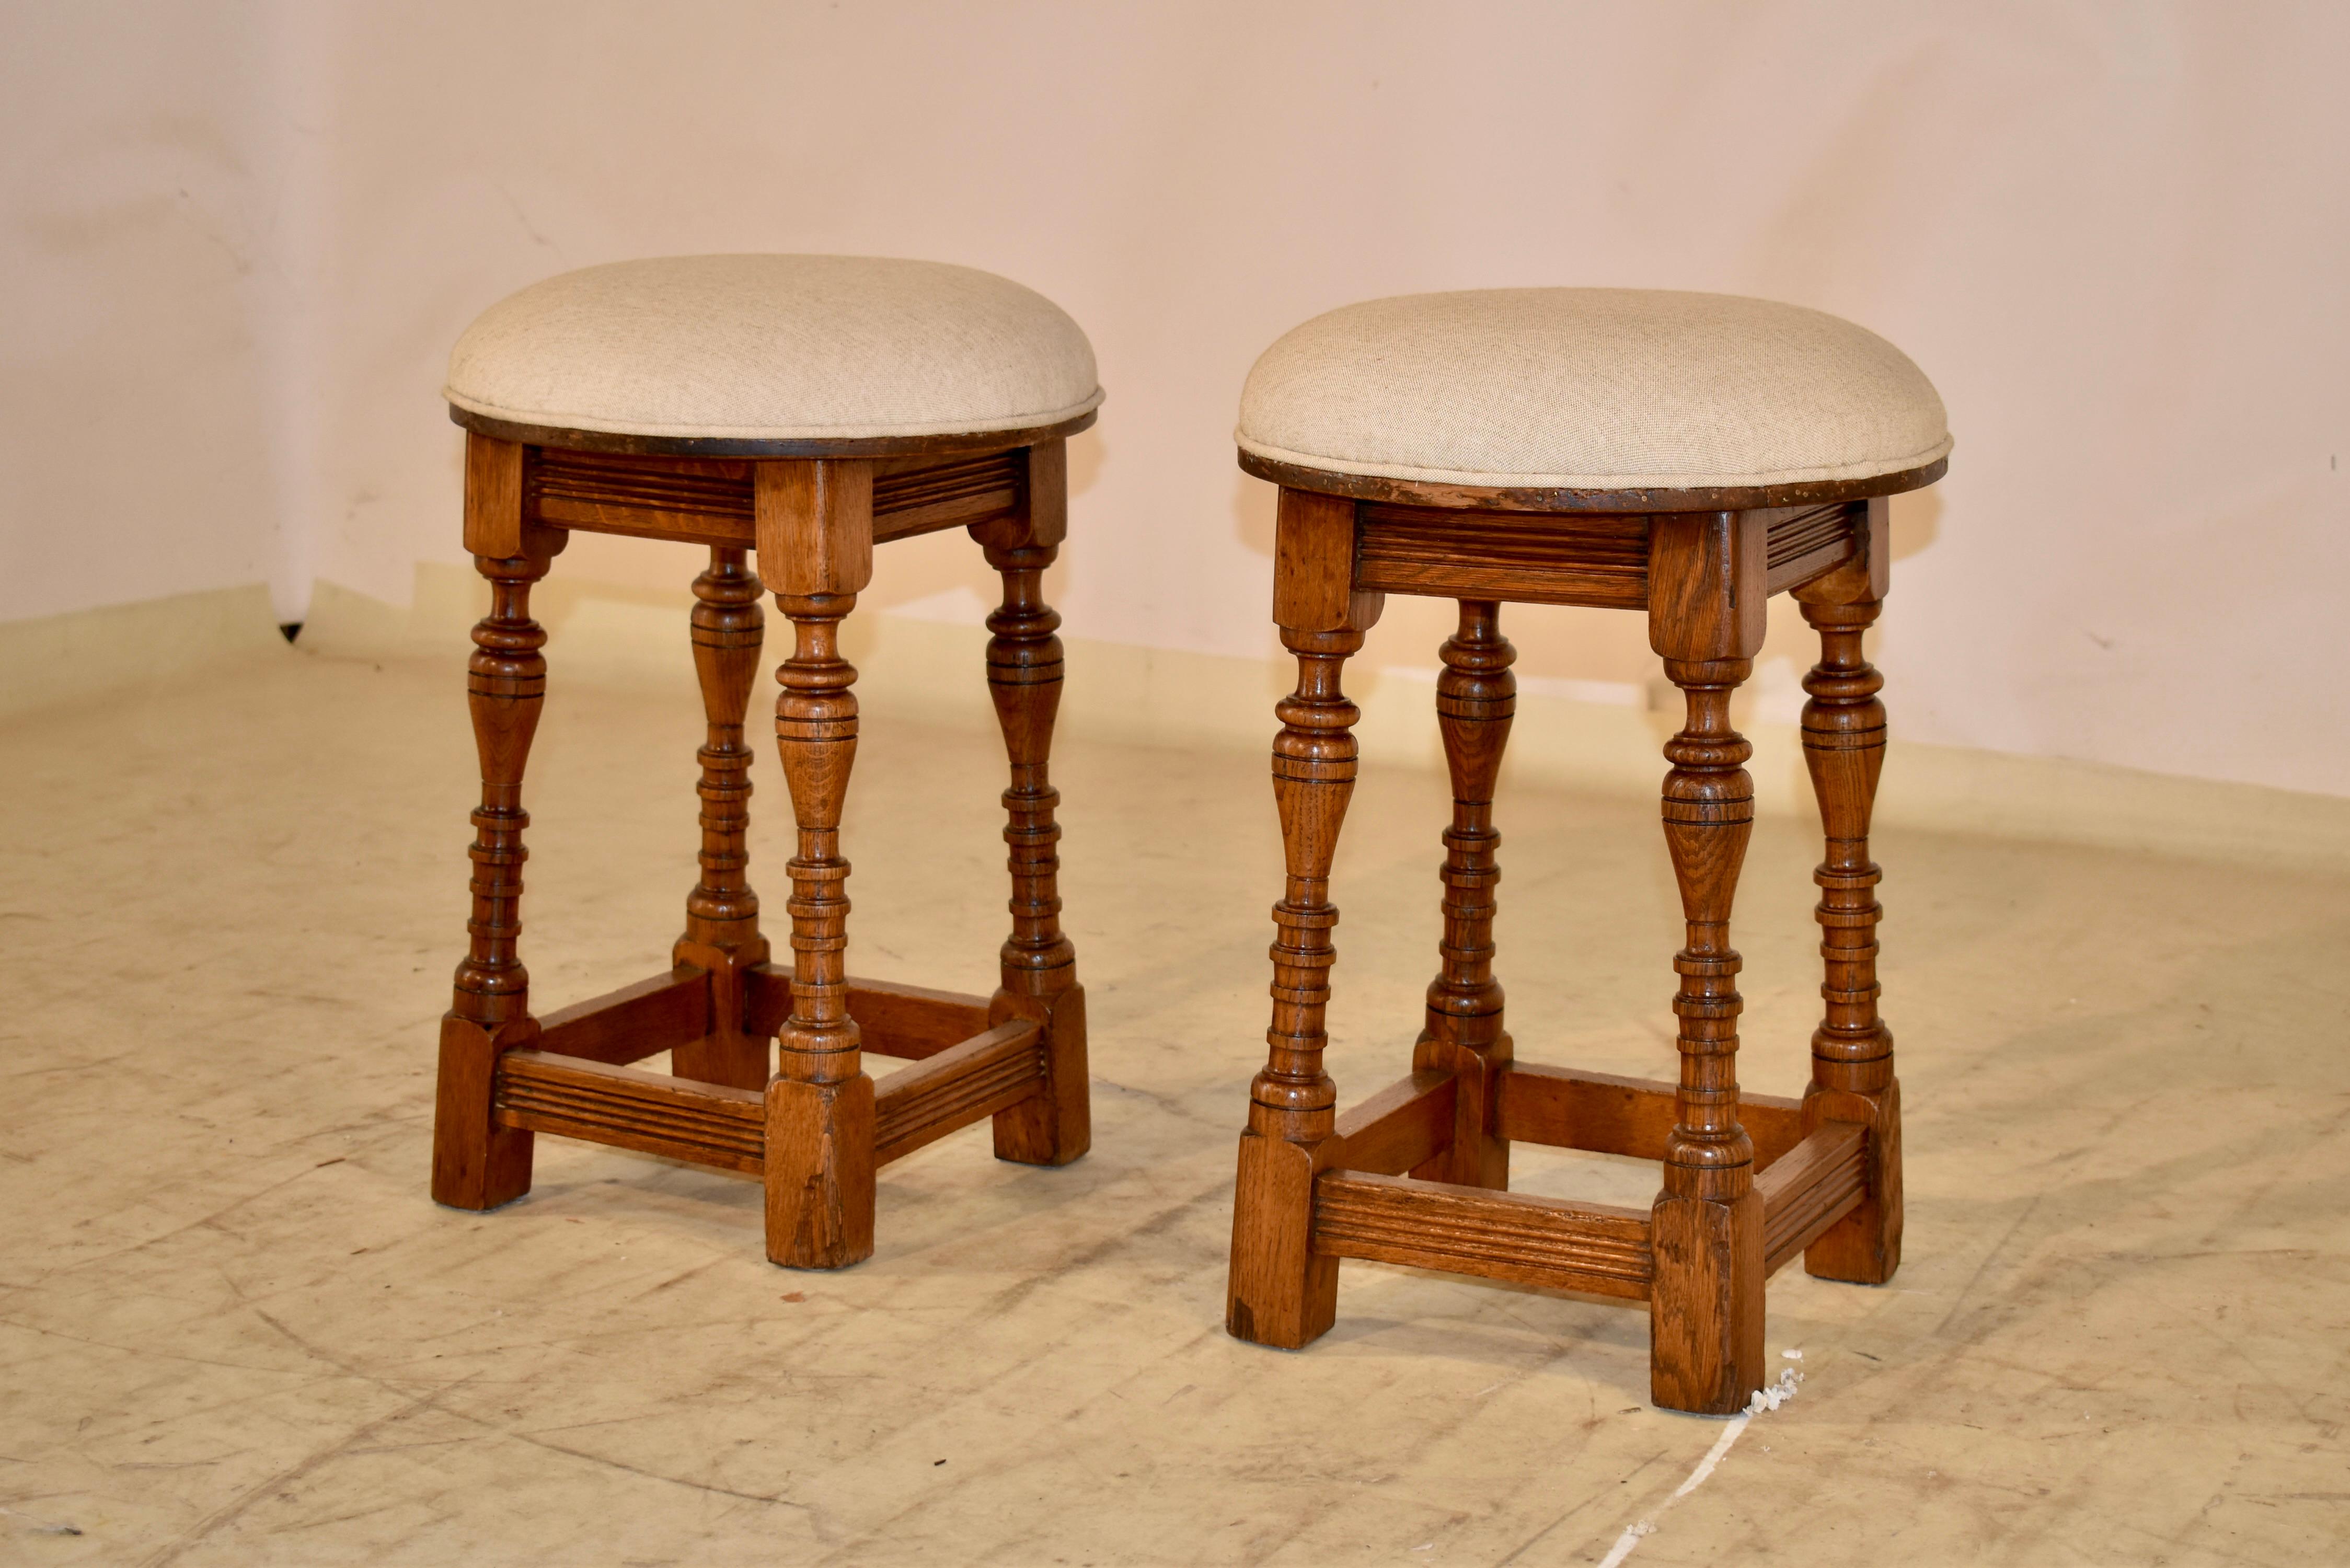 Pair of Edwardian English Upholstered Stools In Good Condition For Sale In High Point, NC